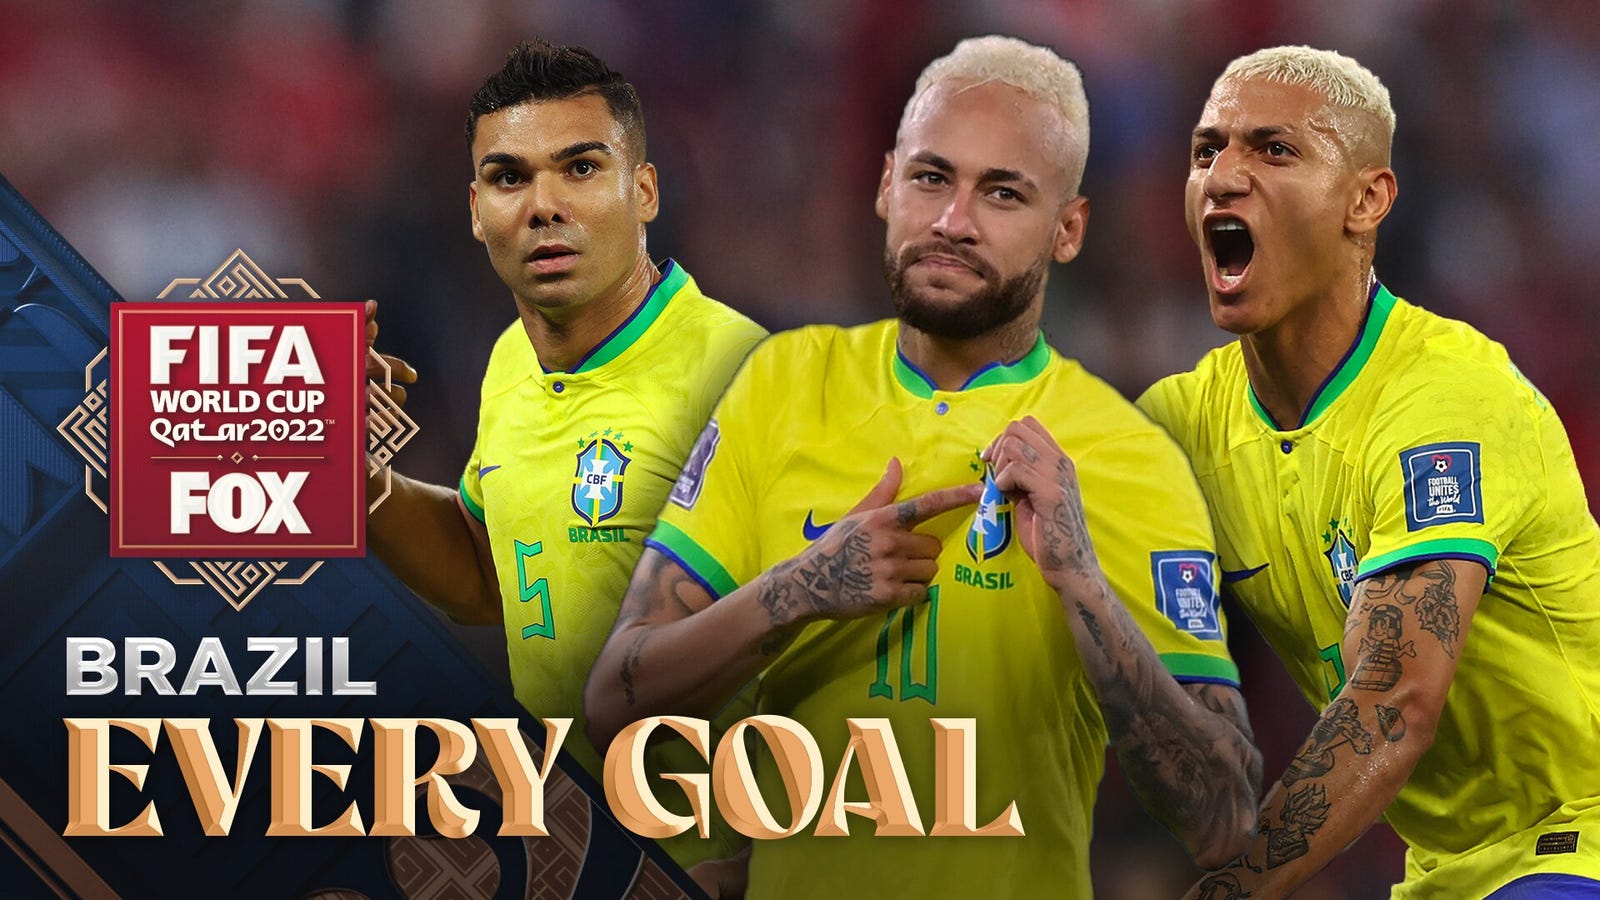 Neymar, Richarlison, Casemiro and every goal by Brazil in the 2022 FIFA World Cup